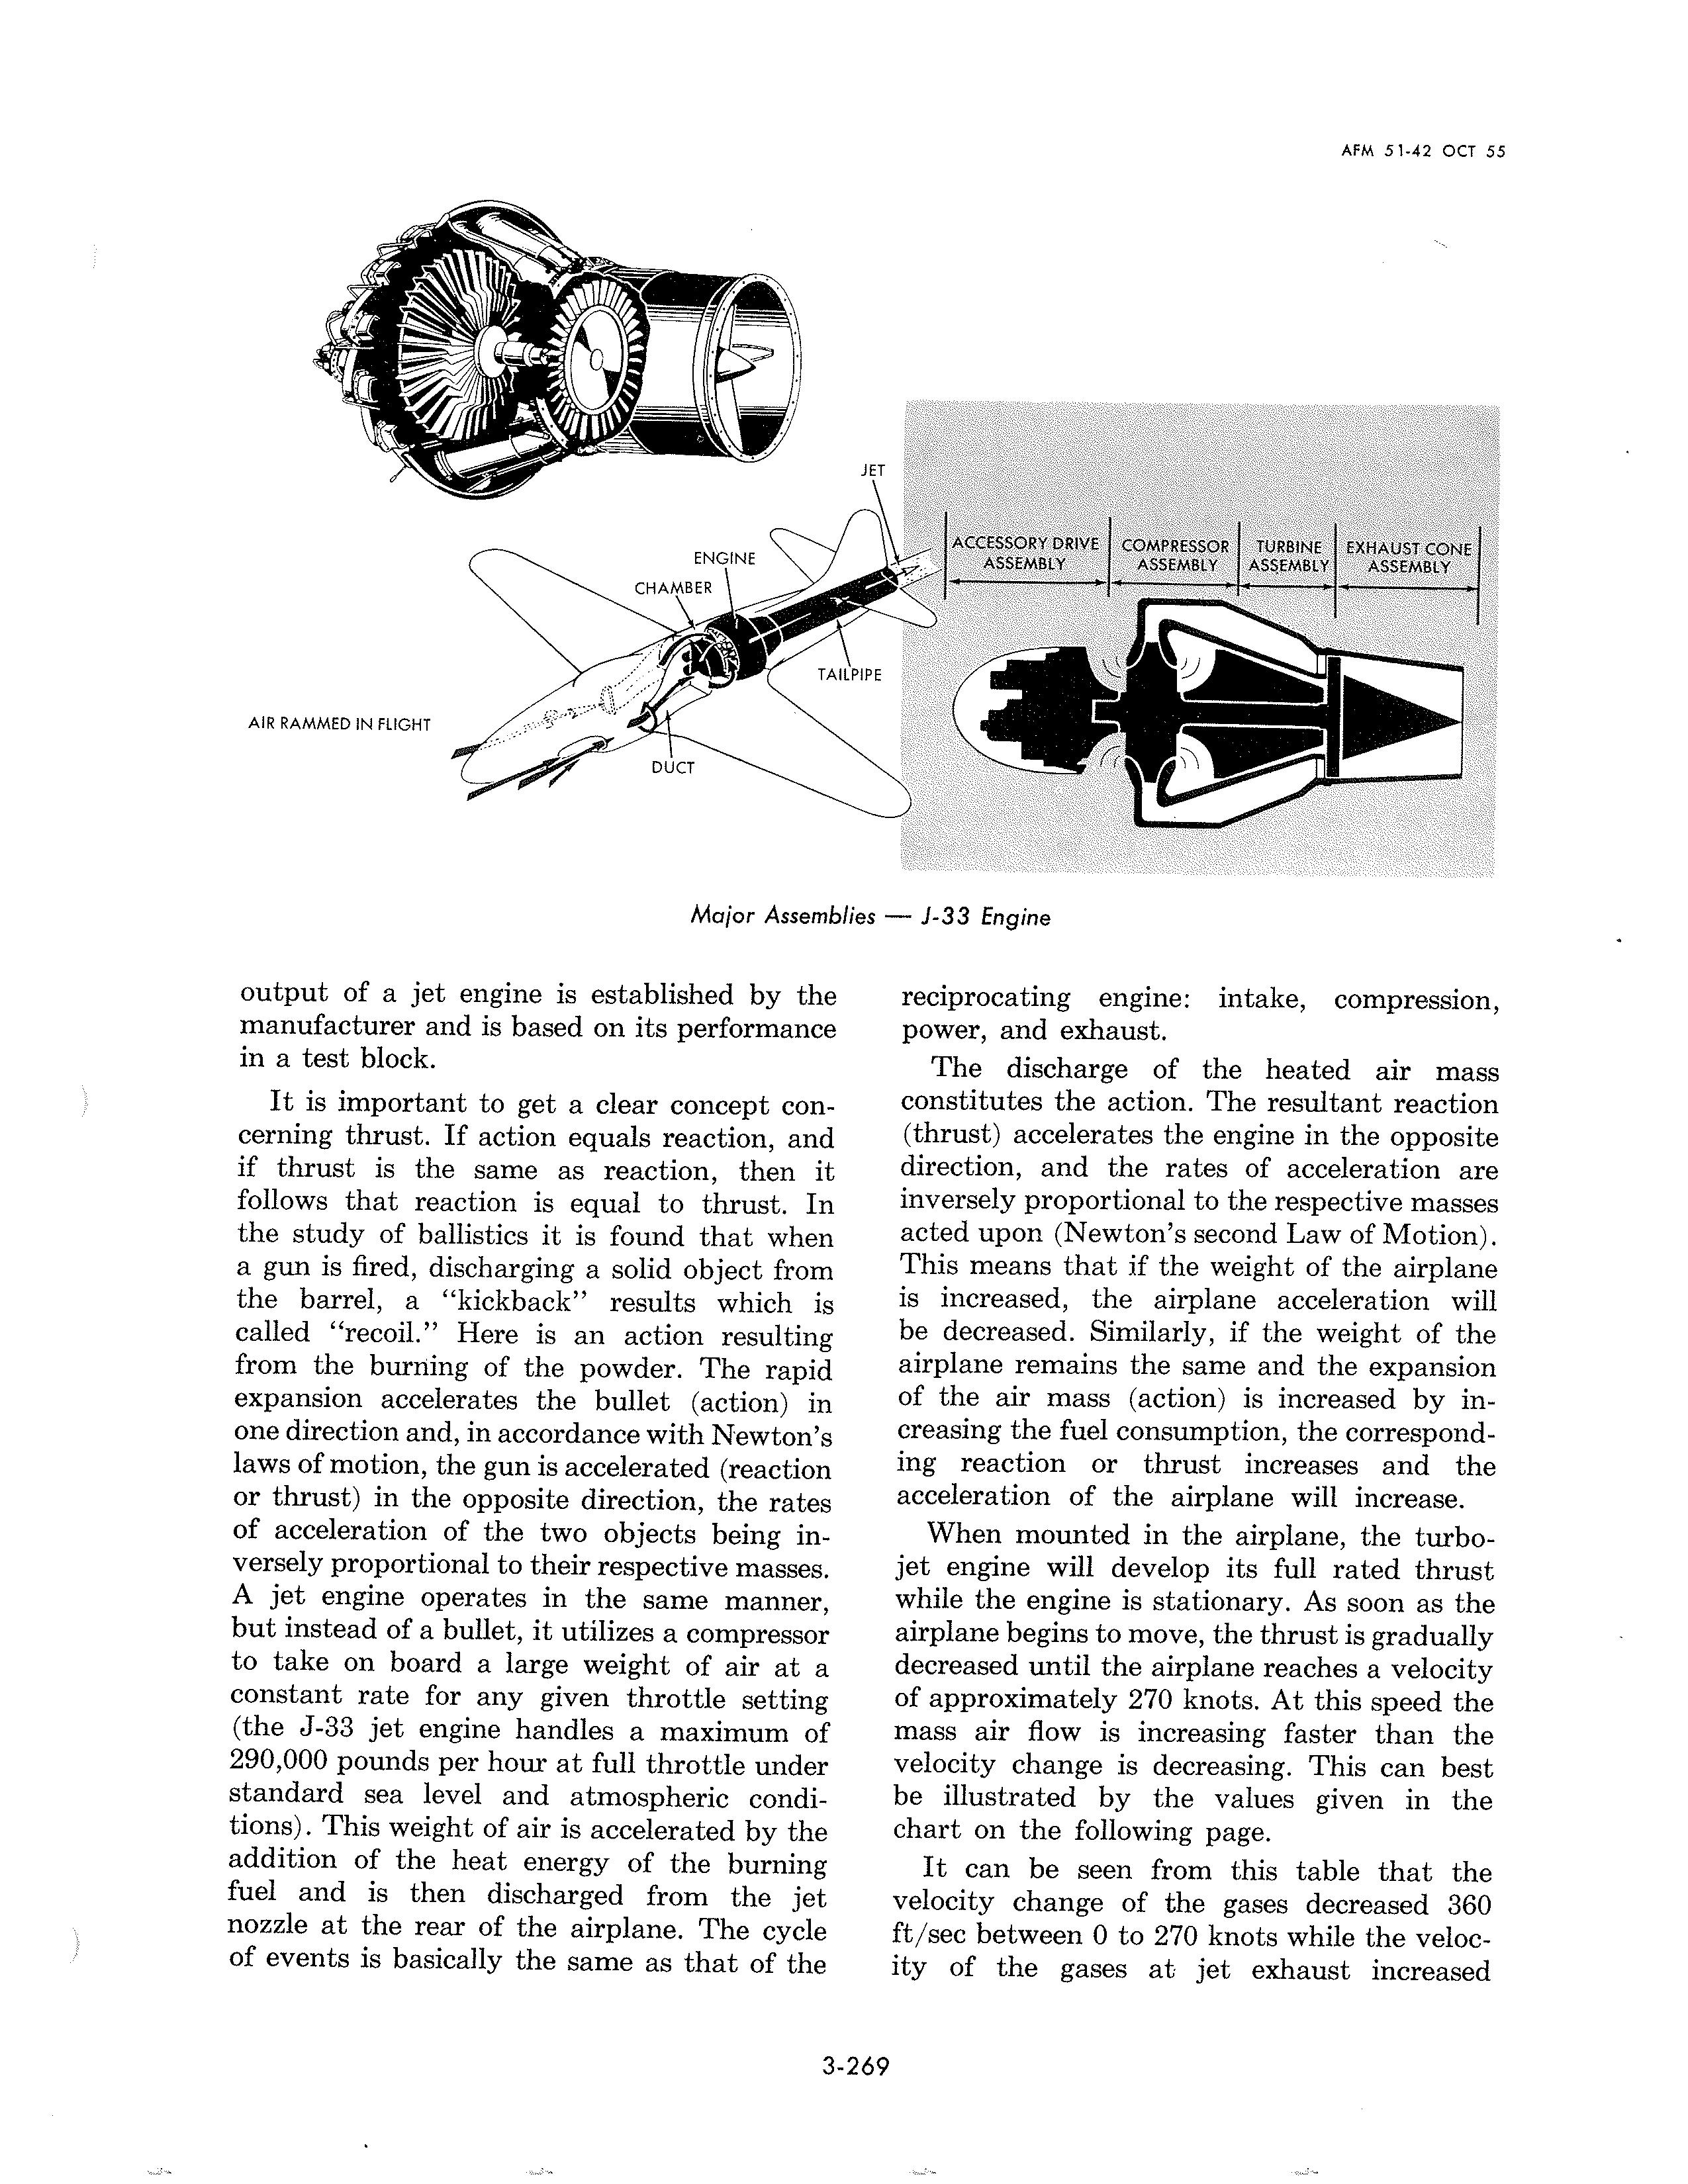 Sample page 273 from AirCorps Library document: Aircraft Engineering for Pilots